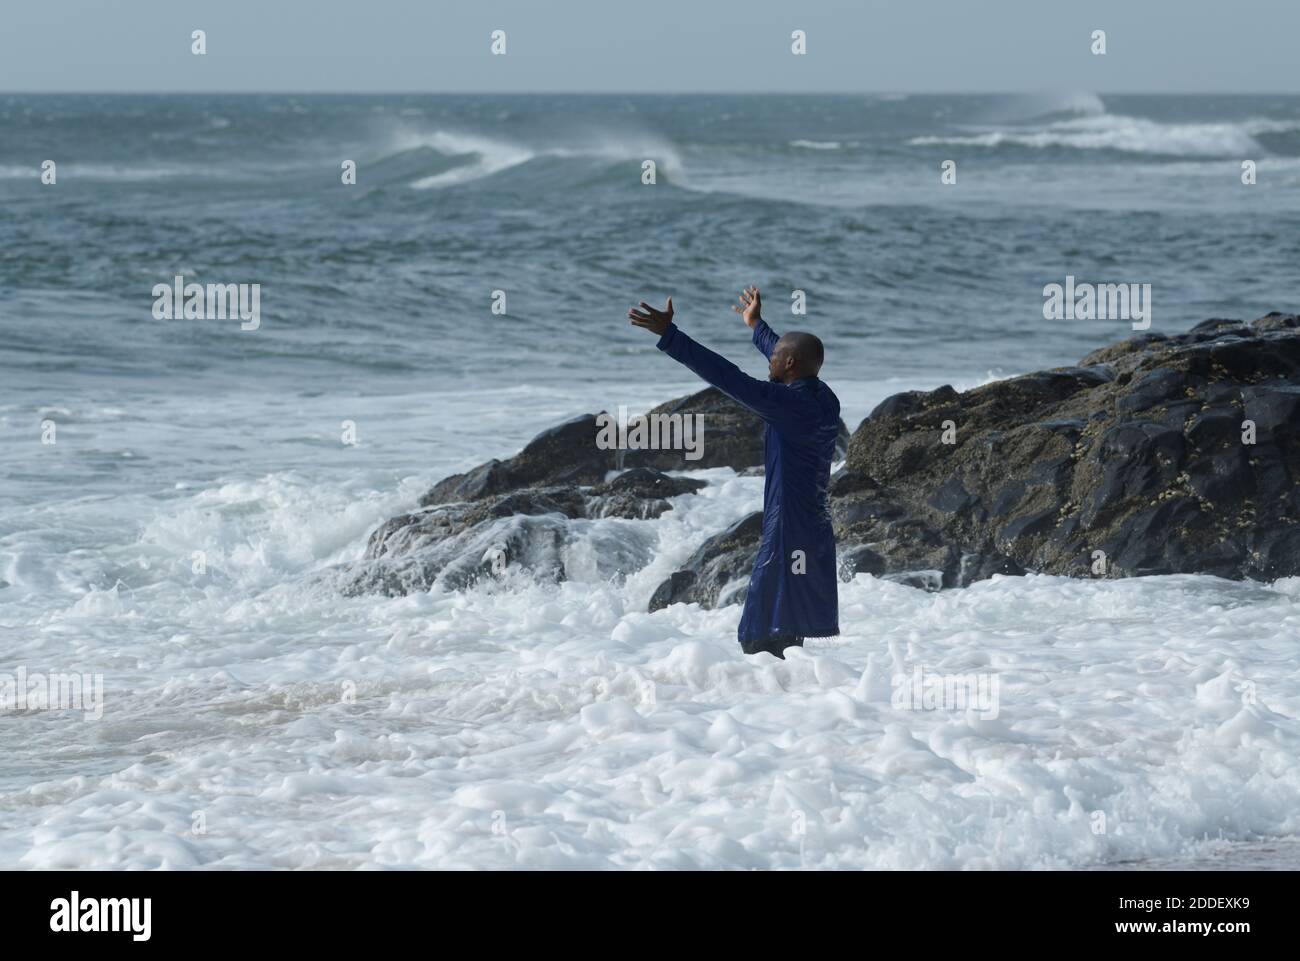 Religion, worship, faith, single adult man, spiritual cleansing ceremony in water, people, landscape, Durban, South Africa, ethnic, ritual, activity Stock Photo